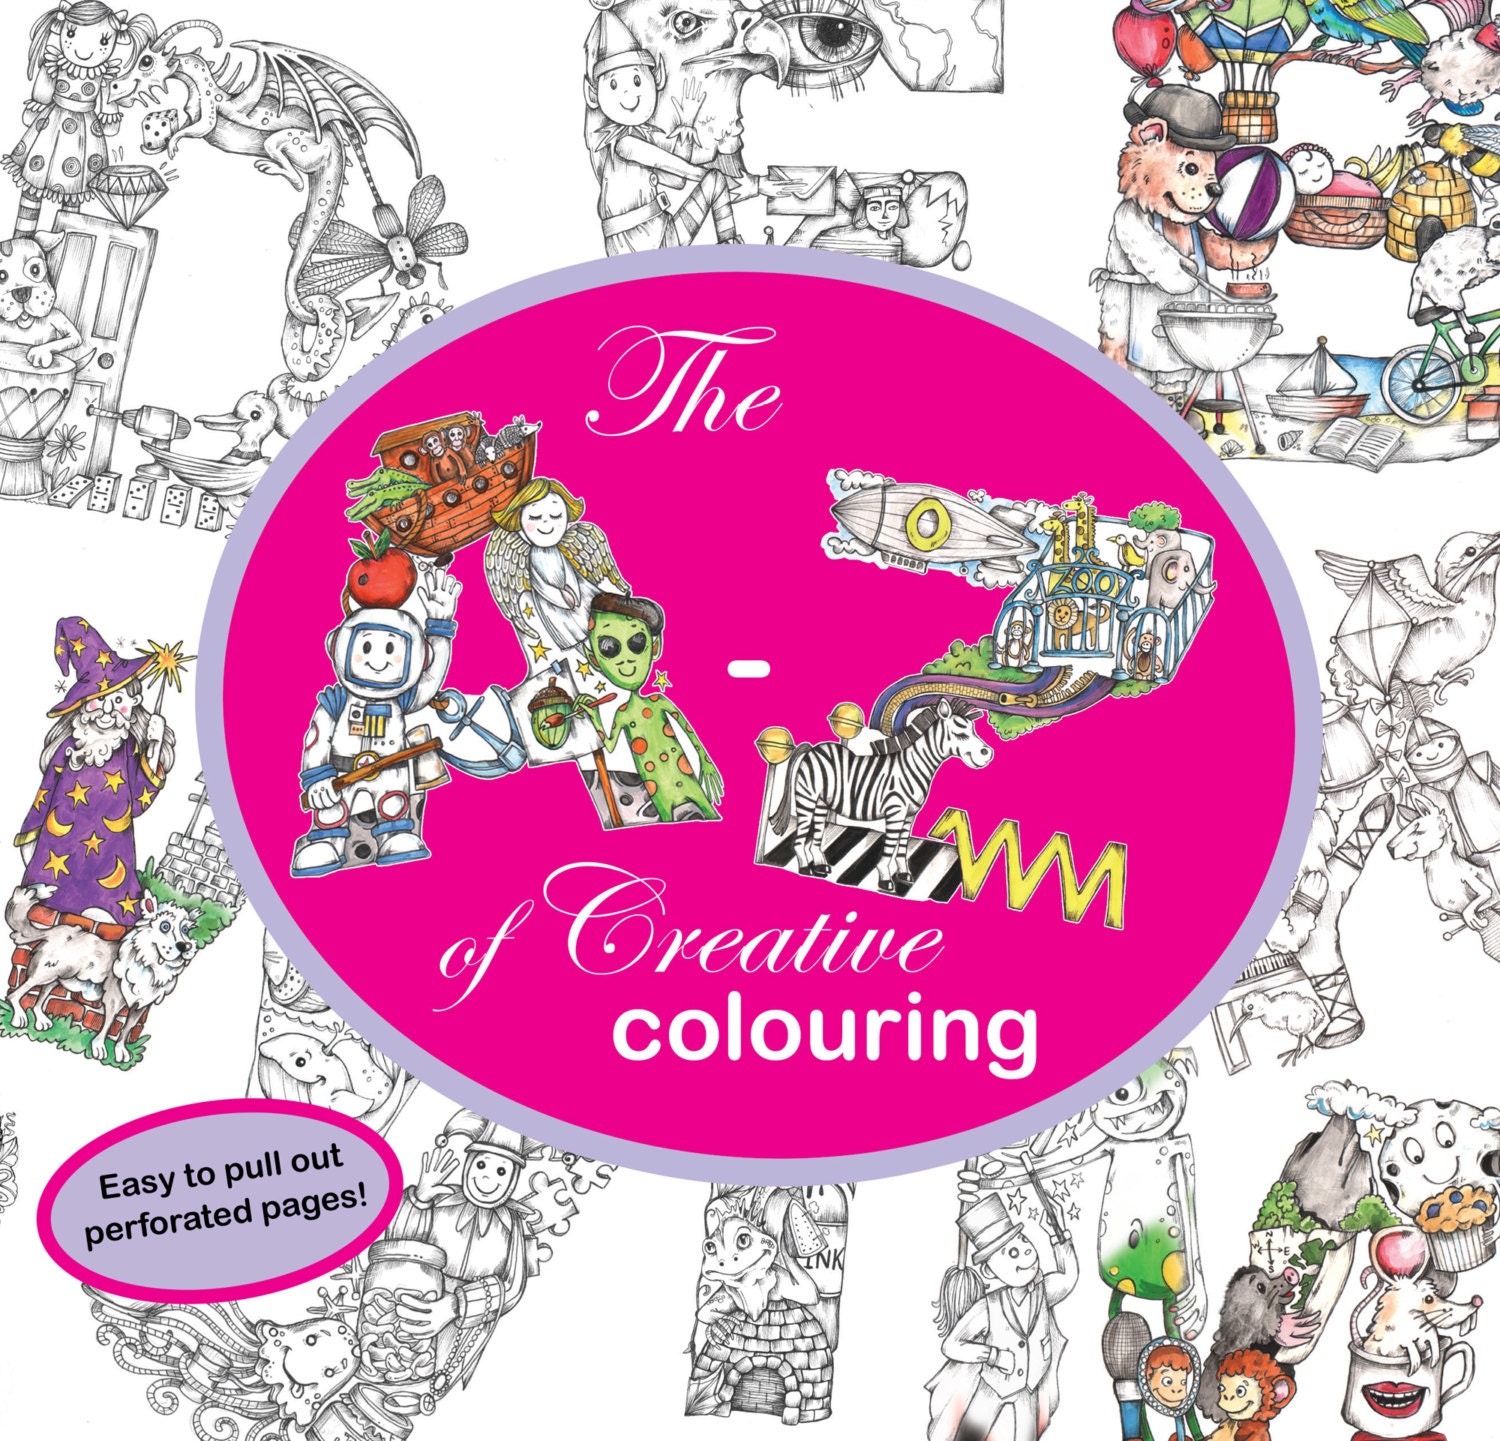 Pdf Instant Download The A To Z Of Creative Colouring By Etsy